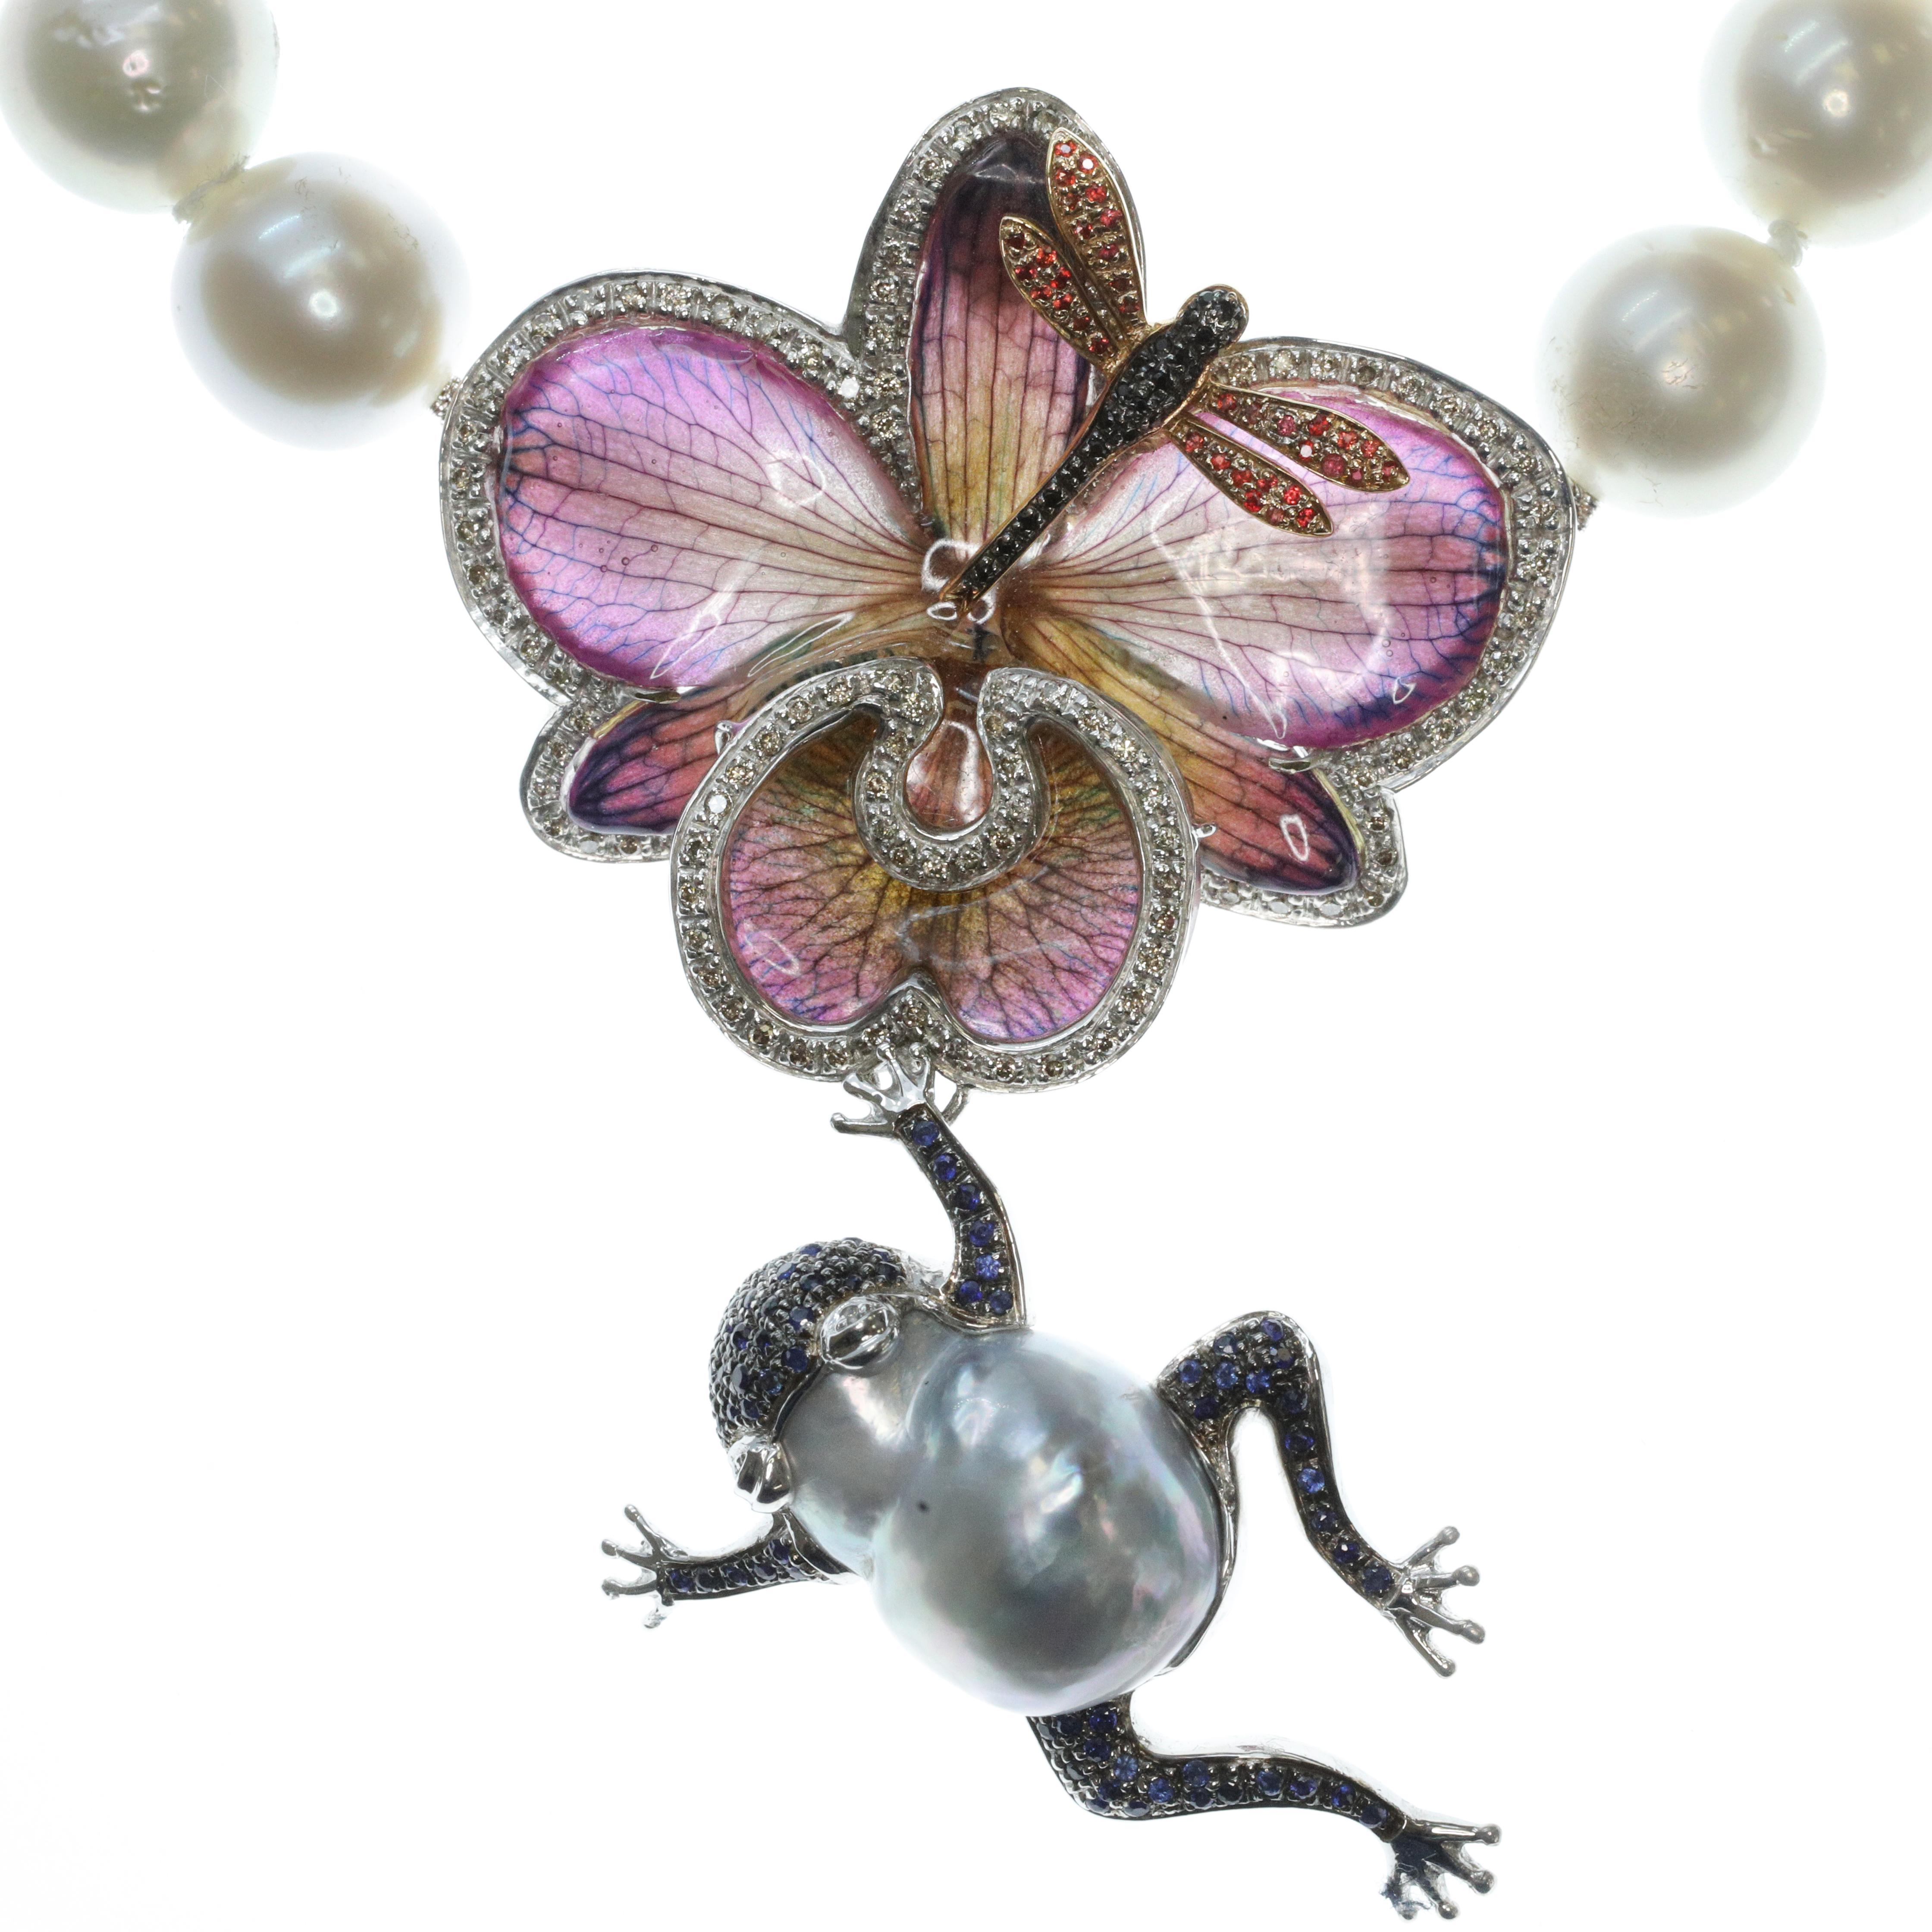 This is a gorgeous collar necklace made from Australian pearls completed by a large flower, dragonfly and leaping frog pendant. Made from the real bloom of a stunning mauve orchid -- caught at its most vibrant and beautiful, and preserved in a